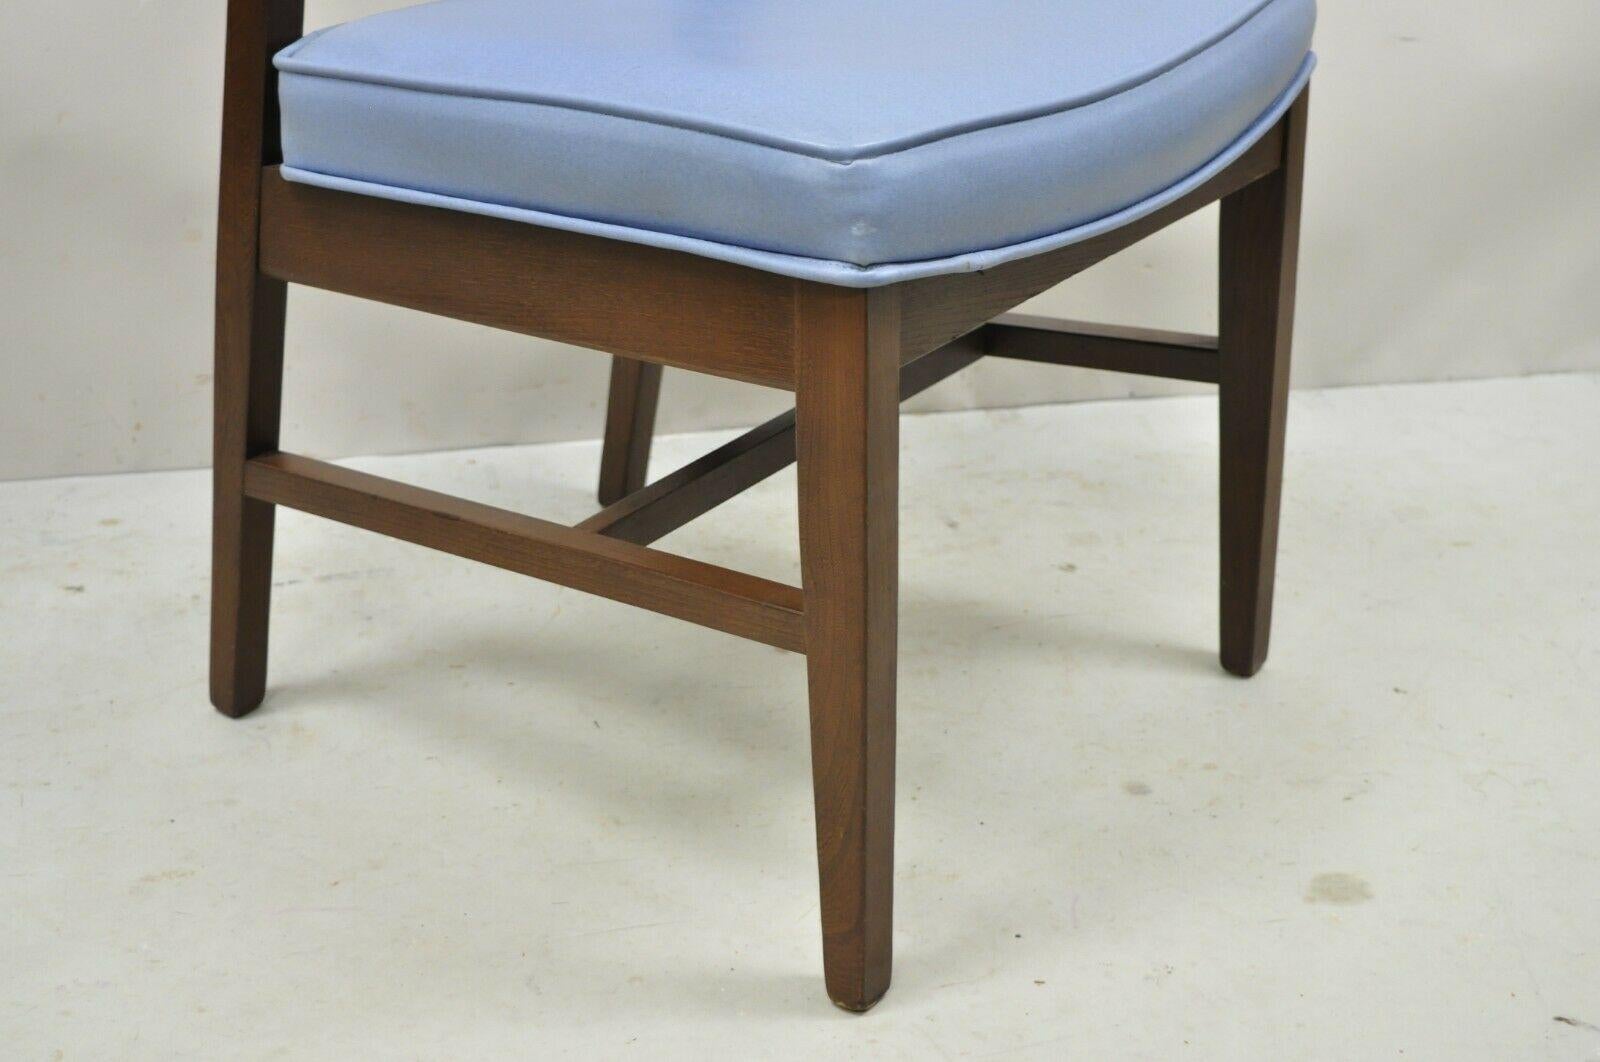 Vintage Mid Century Modern Jens Risom Style Blue Sculpted Dining Chair -Set of 6 In Good Condition For Sale In Philadelphia, PA